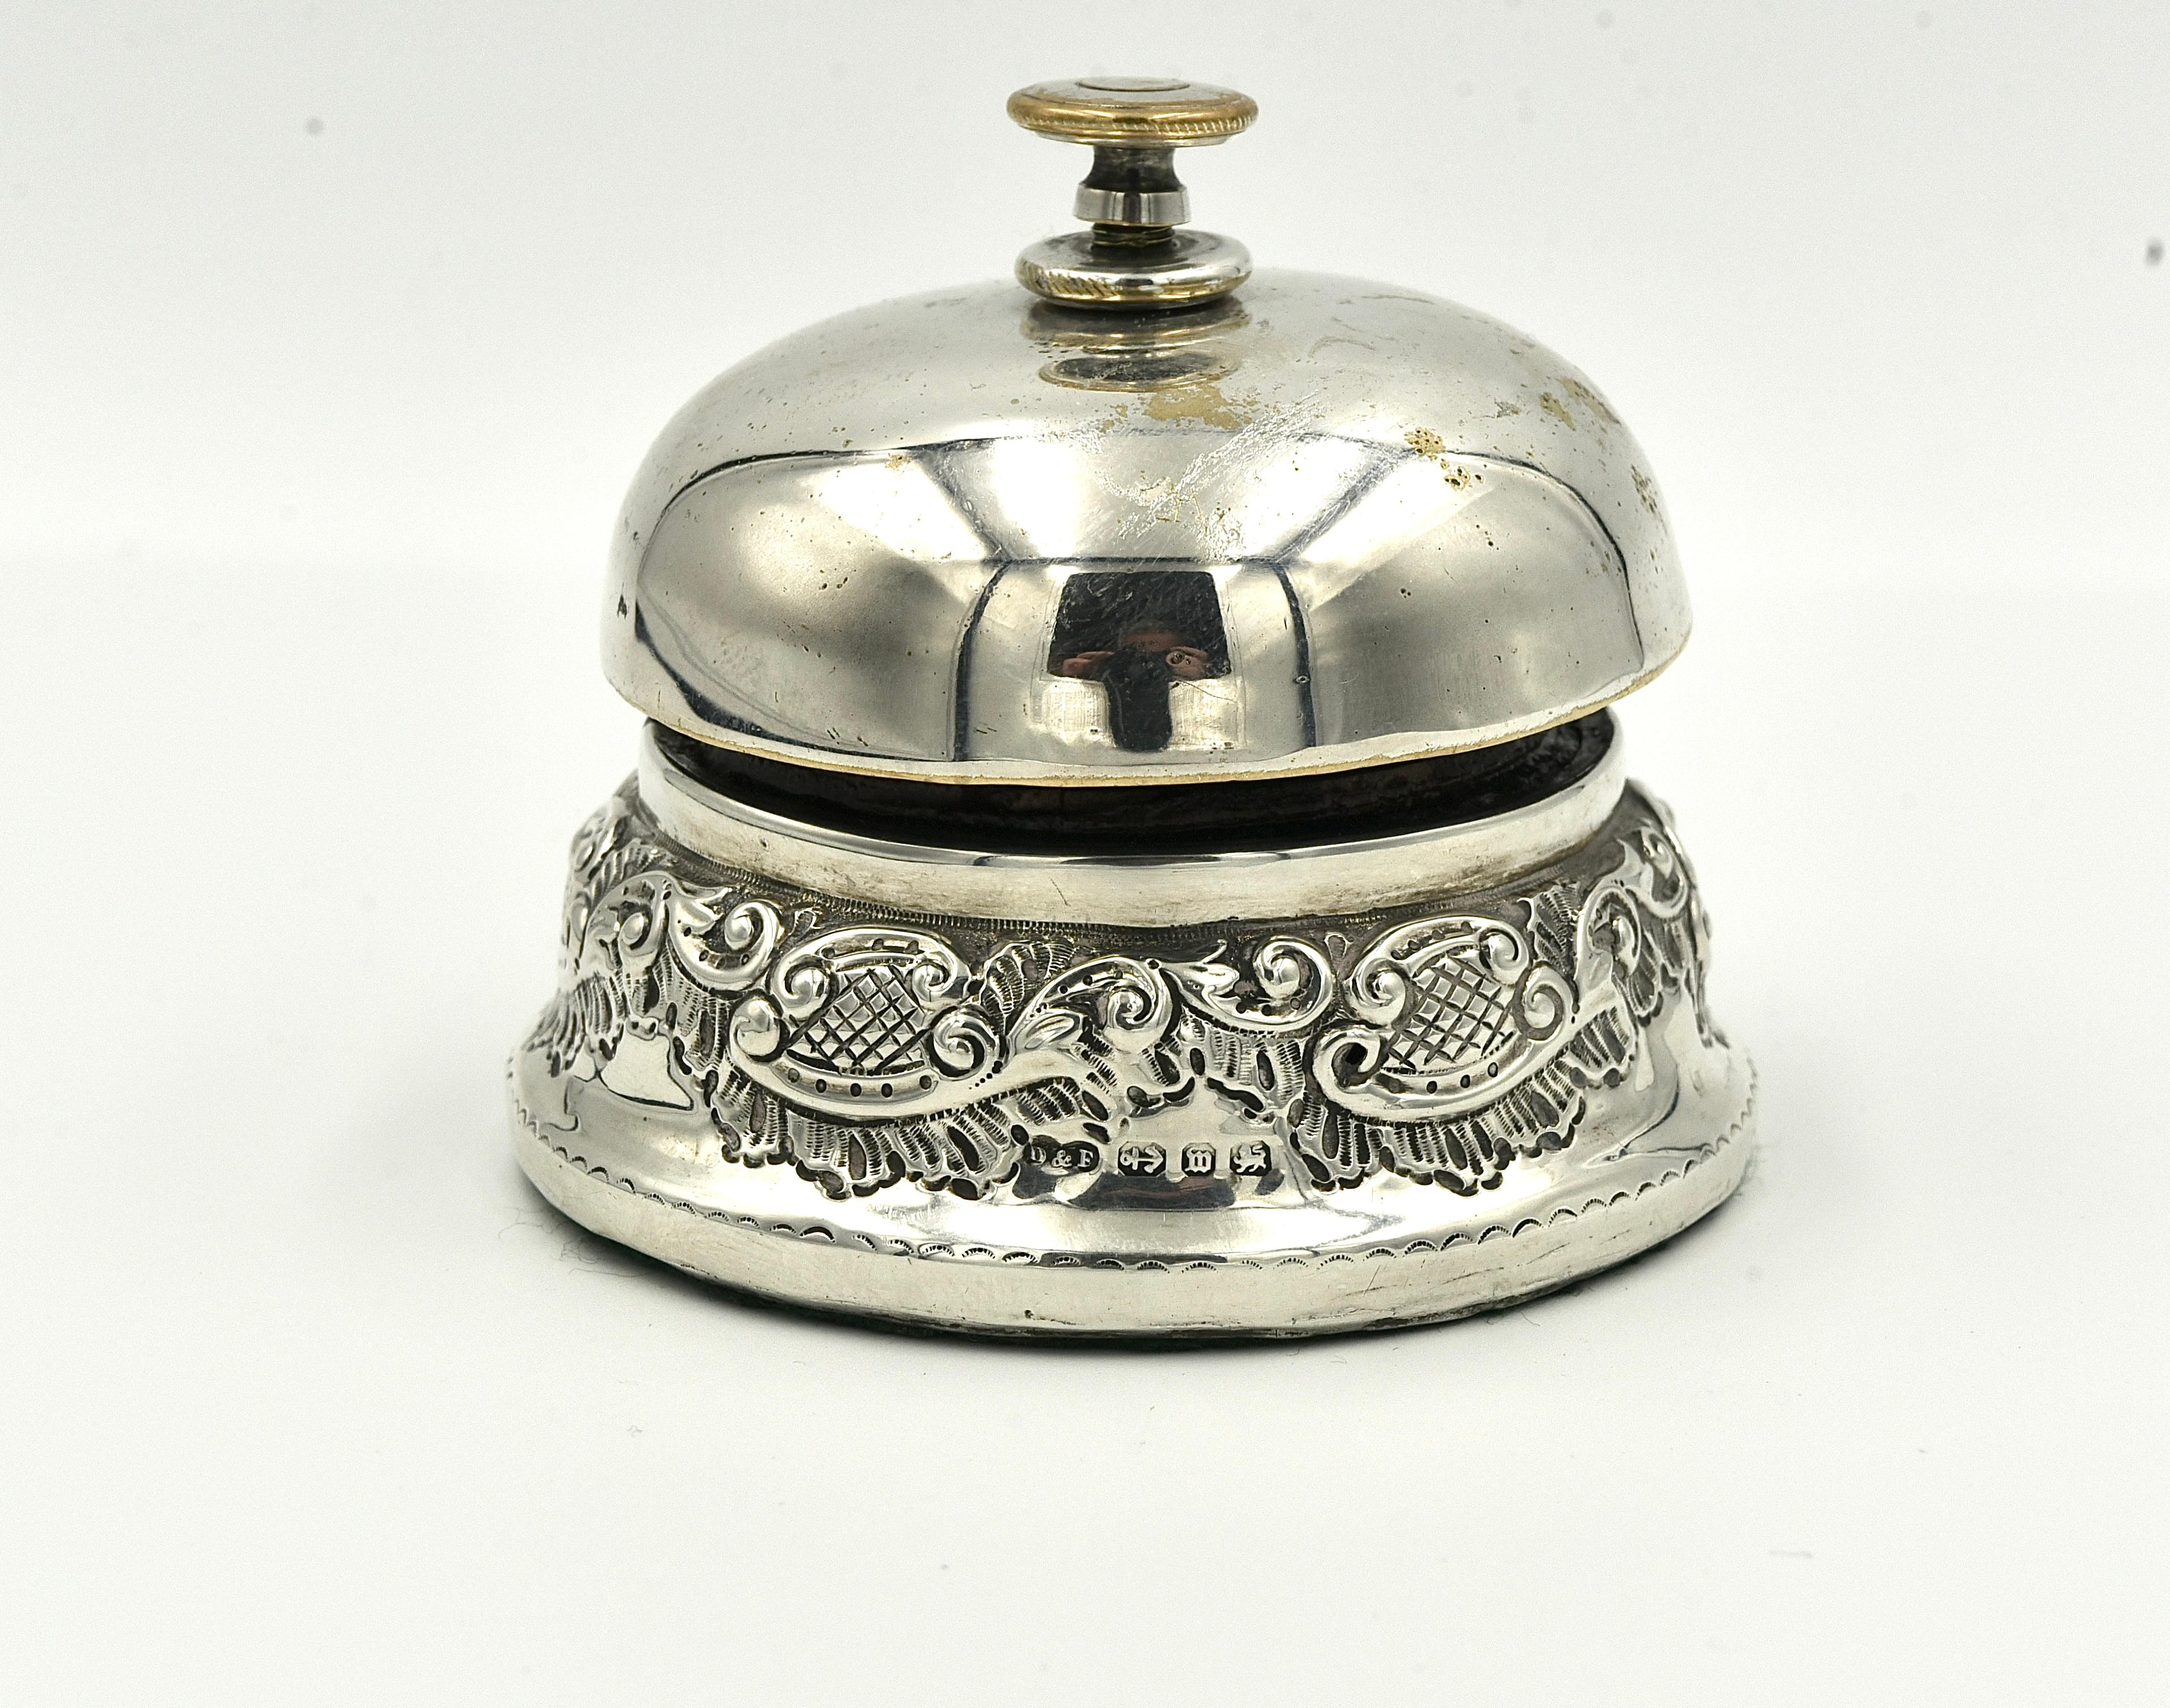 Rare Solid Silver Counter Reception Bell Turn Mechanism Hallmarked Birmingham Deakin Fracis 1886.

Solid silver base, the top section bell is silver plate  The top turn button is silver plate showing some light ware .
very decorative fully working 